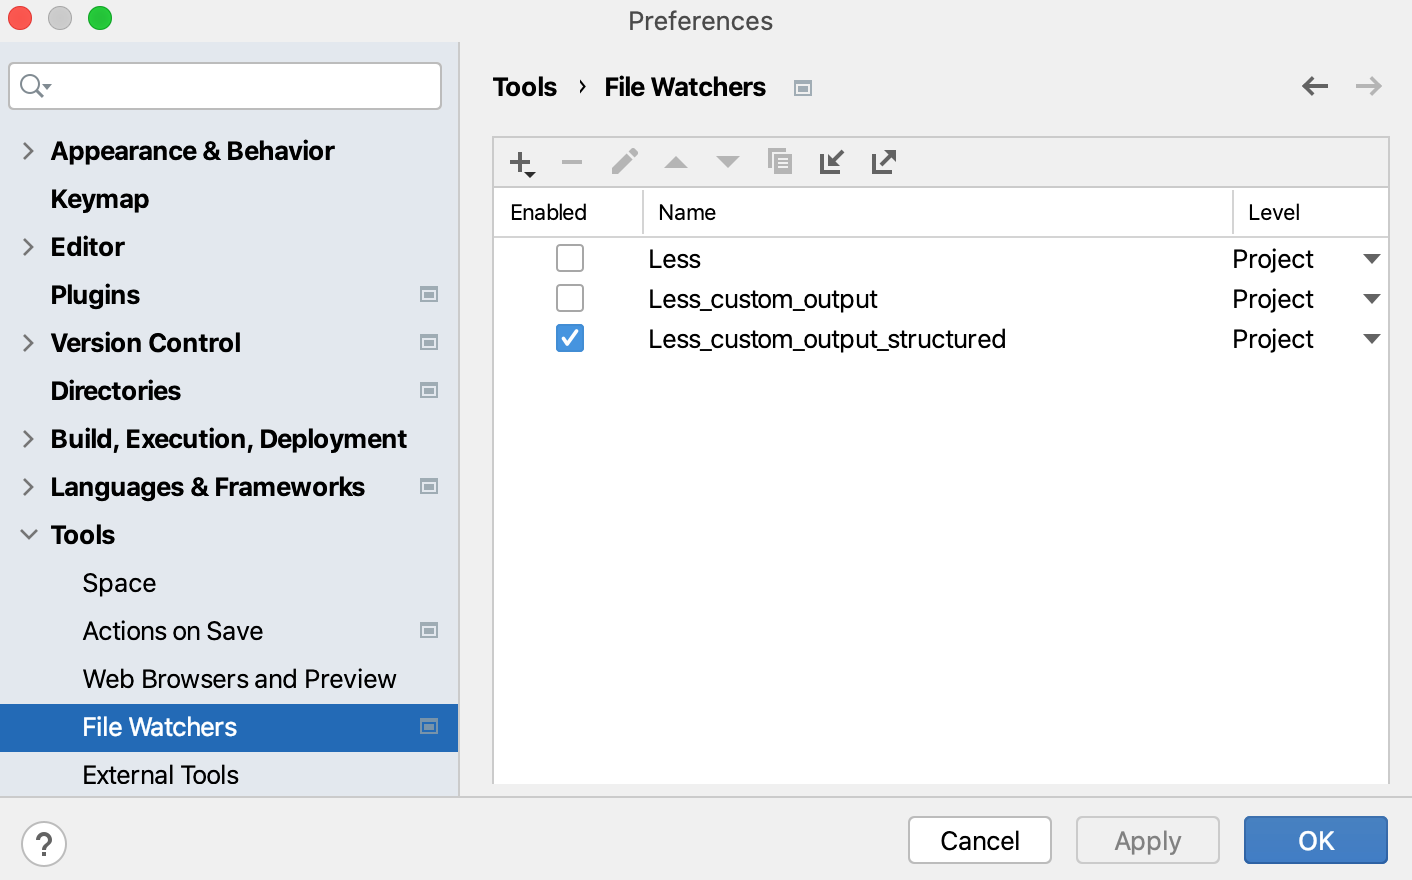 Custom output with folder structure: File Watcher saved and enabled